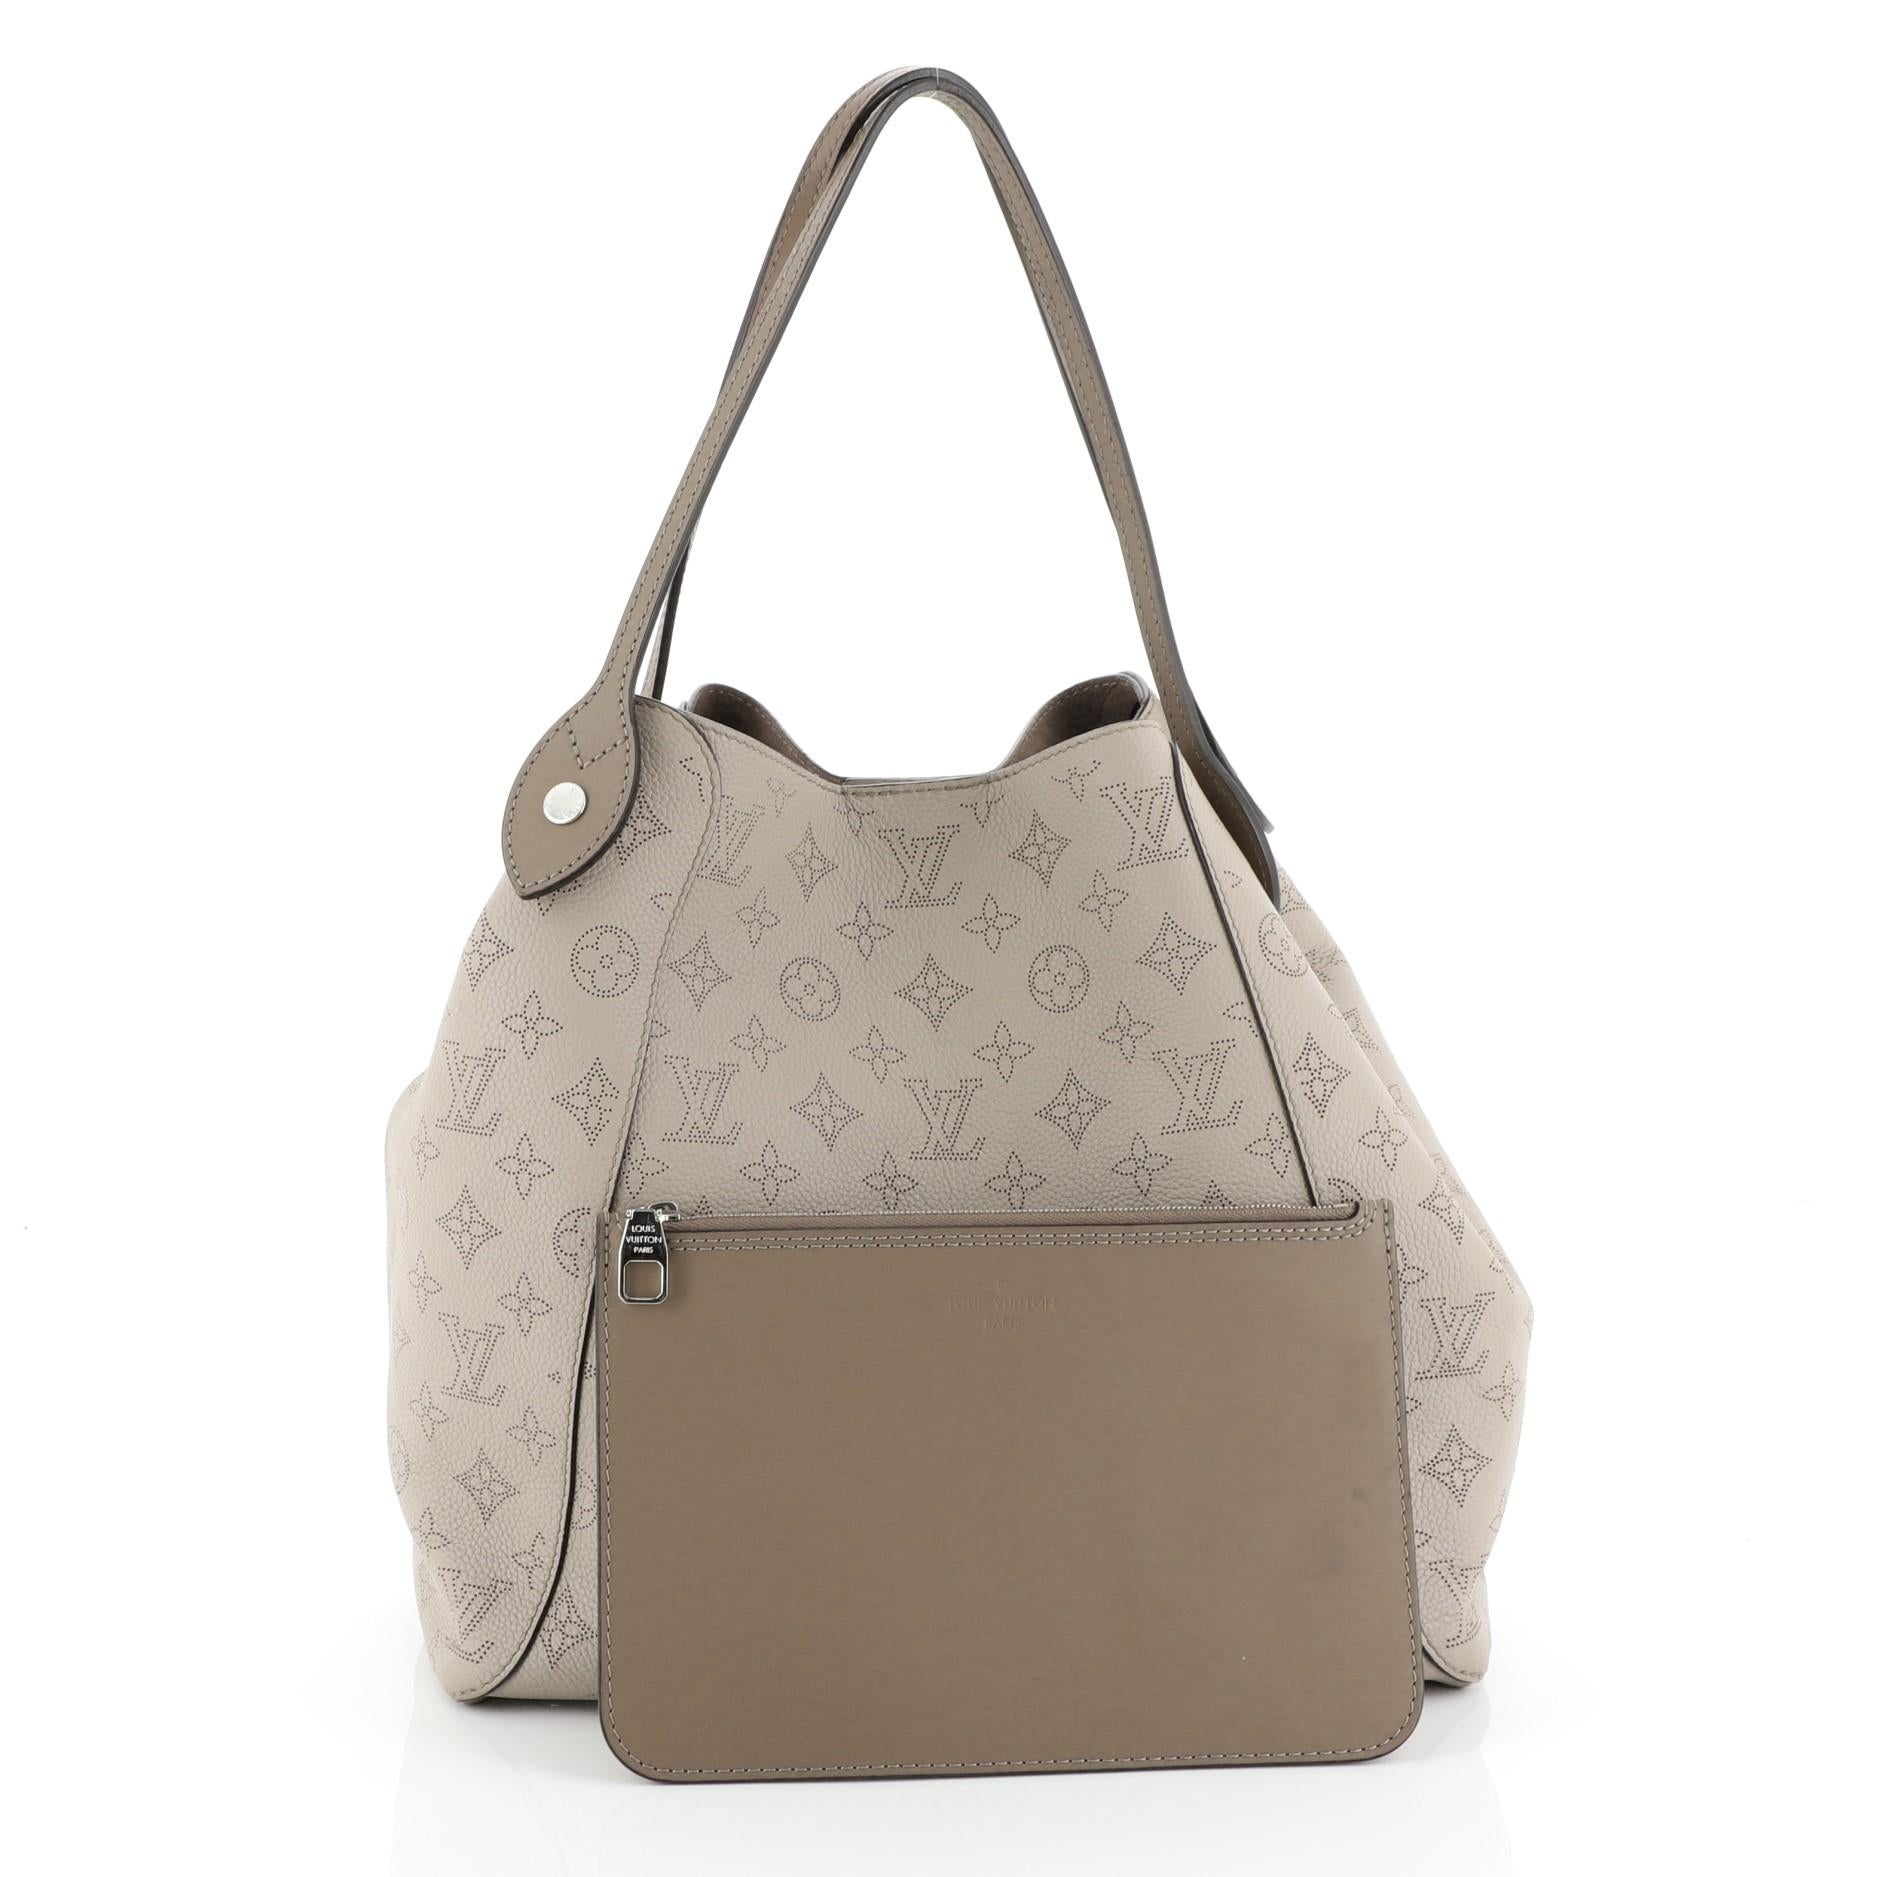 This Louis Vuitton Hina Handbag Mahina Leather MM, crafted from neutral mahina leather, features dual slim leather handles and silver-tone hardware. Its magnetic snap button closure opens to a neutral microfiber interior. Authenticity code reads: